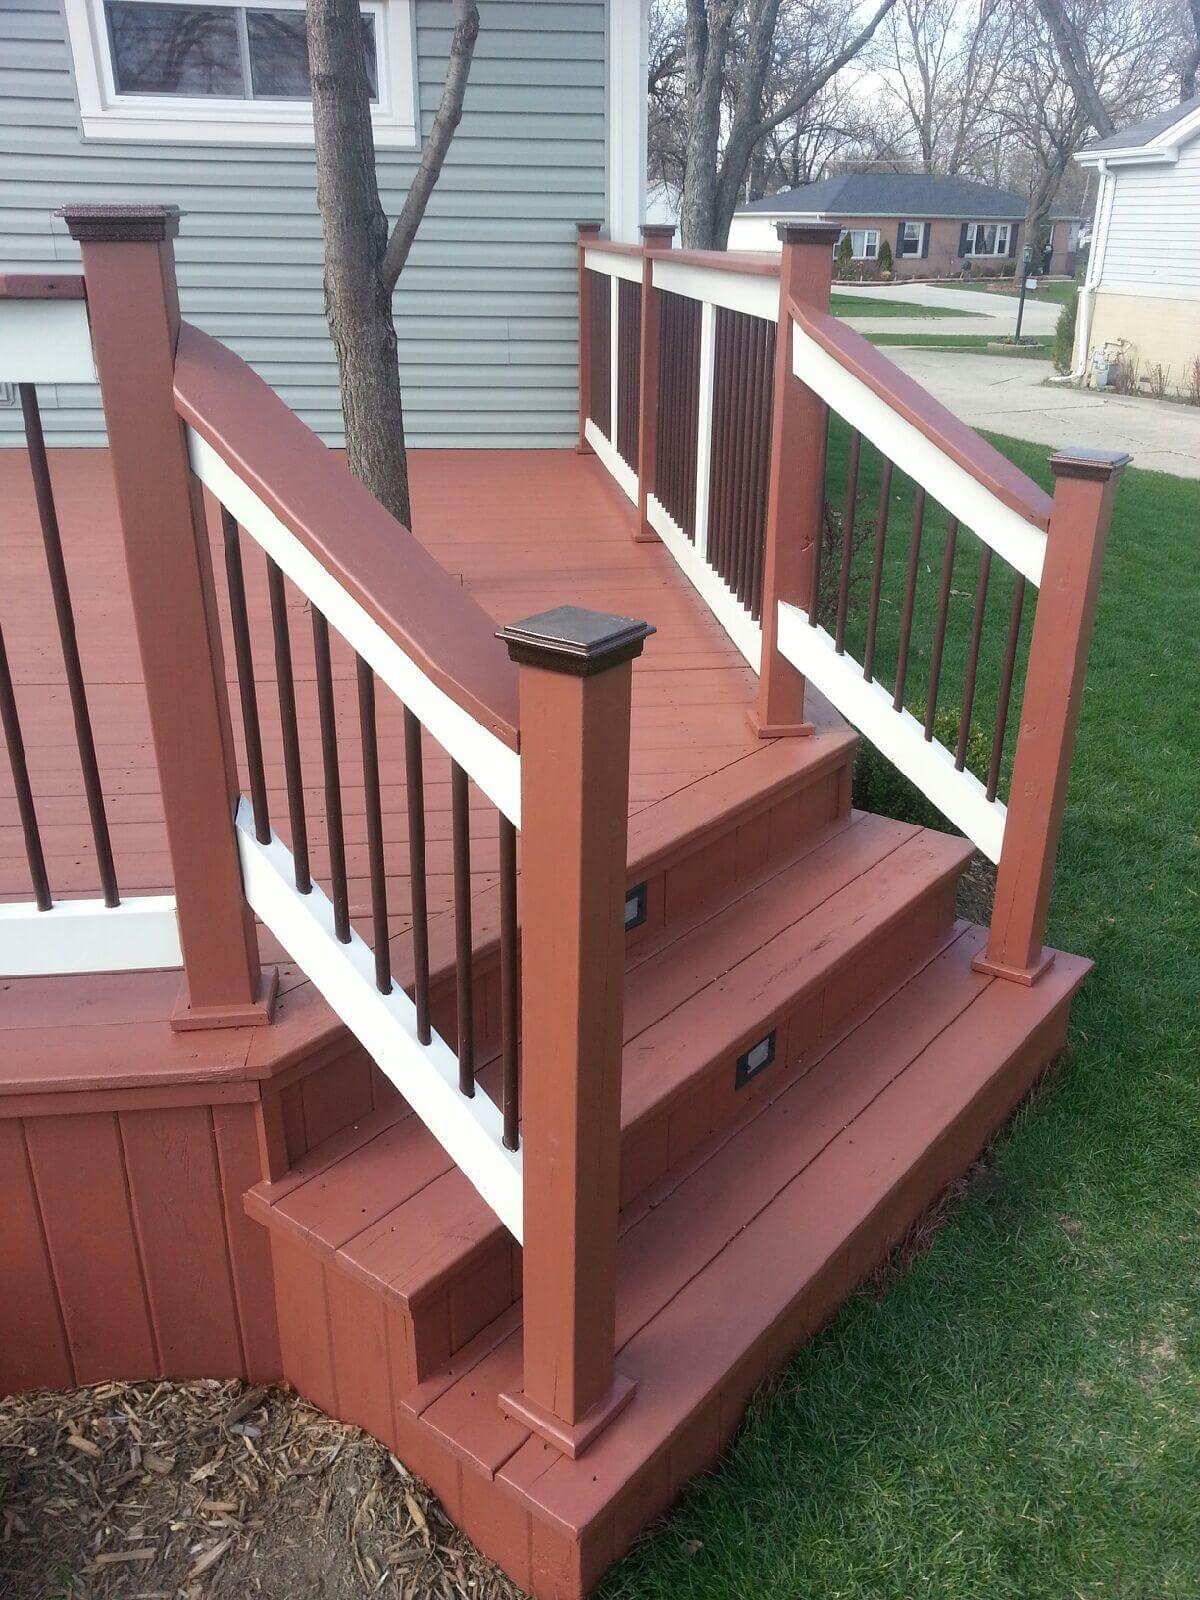 Repairs and maintenance for your deck, fence, and exterior wood staining. - Deck Staining Addison - Deck Cleaning Services